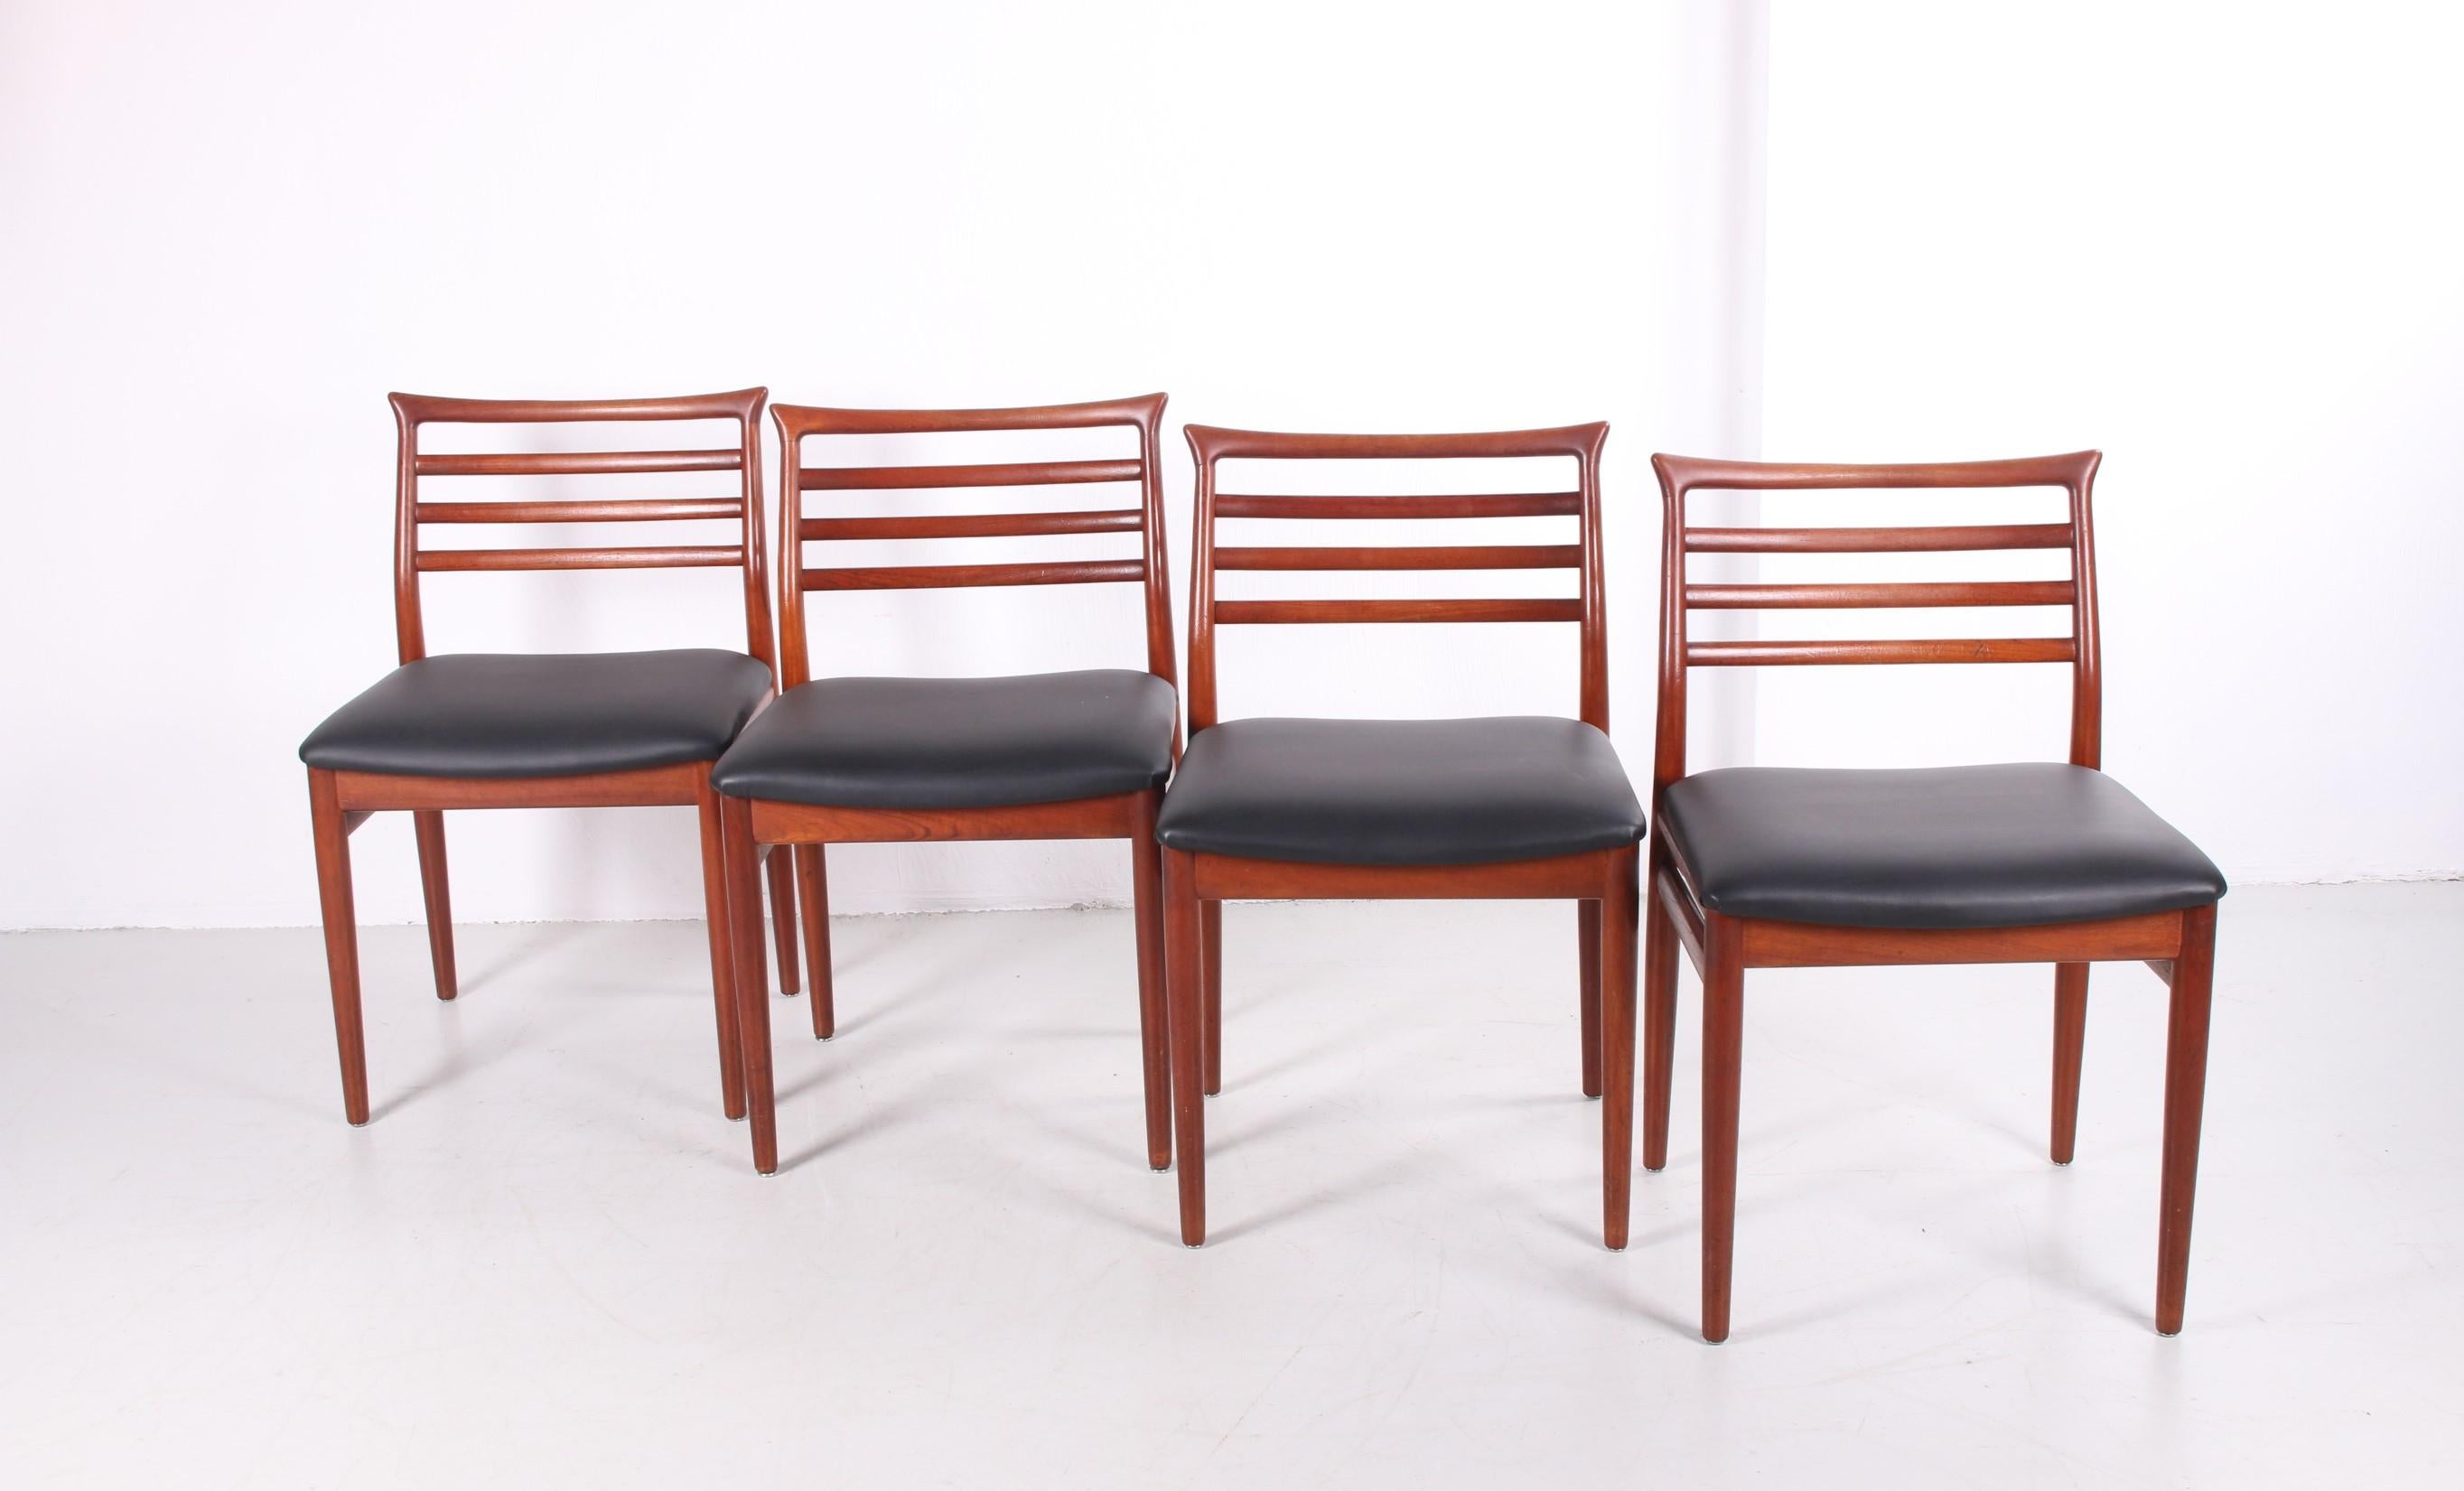 Dining room chairs by Erling Torvits for Sorø Stolefabrik, 1960s
Set of 4 dining room chairs designed by Erling Torvits and manufactured for Sorø Stolefabrik in the 1960s, Denmark. The organically shaped wooden frames are made of teak and the chairs